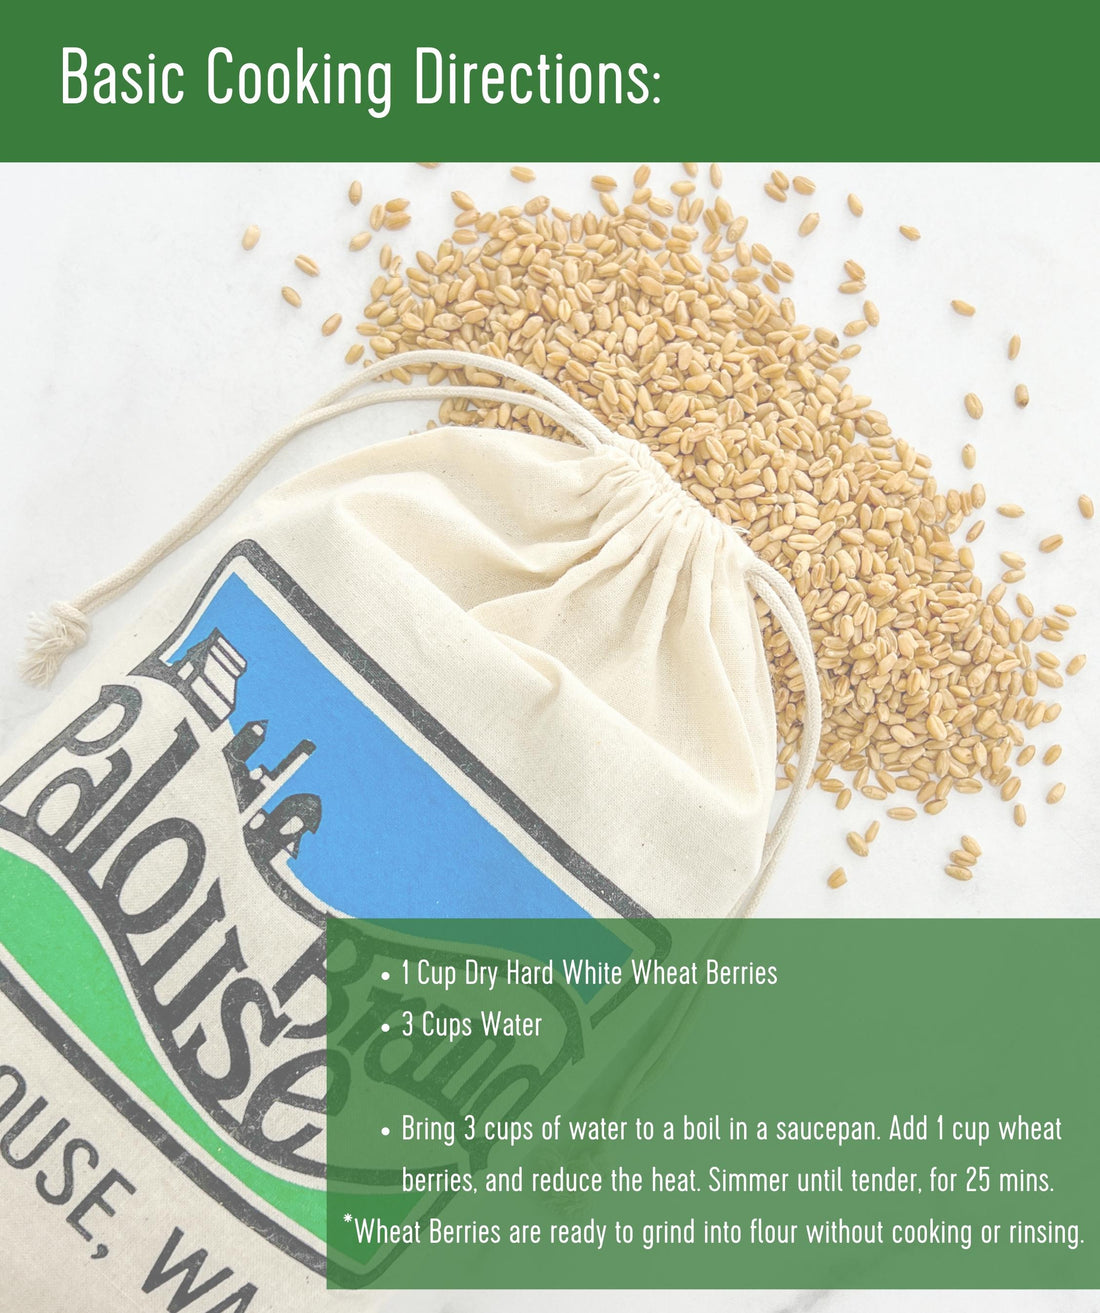 How to Cook Washington State Grown Soft White Wheat Berries, Hard White Wheat Berries, Hard Red Spring Wheat Berries and Hard Red Winter Wheat Berries